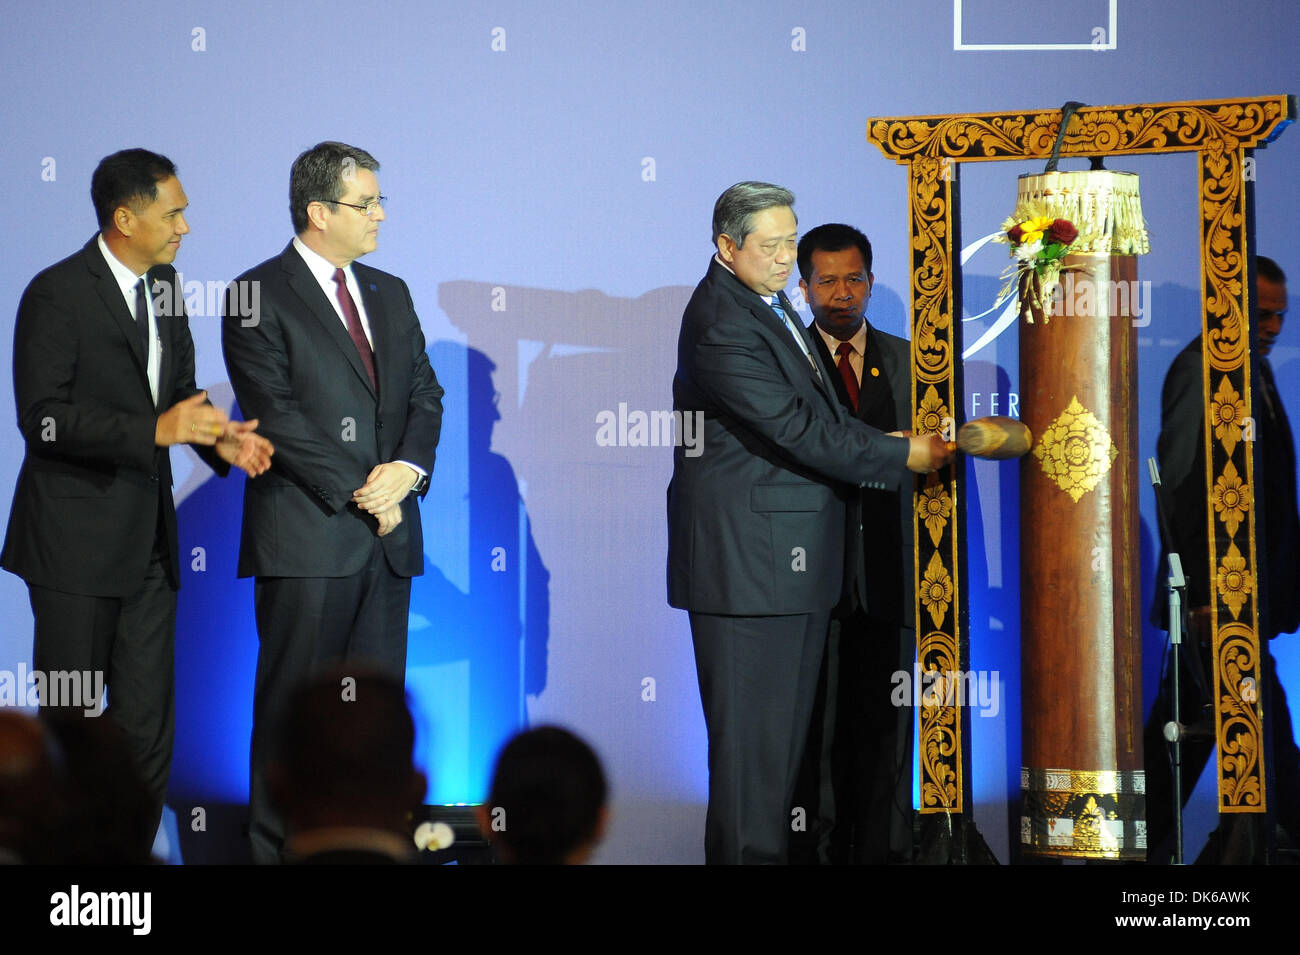 Bali, Indonesia. 3rd Dec, 2013. Indonesian President Susilo Bambang Yudhoyono hits the 'kulkul,' a balinese traditional drum, to open the ninth ministerial conference of the World Trade Organization (WTO) in Bali, Indonesia, Dec. 3, 2013. The four-day-long ninth ministerial conference of the World Trade Organization (WTO), or the MC9, was opened here Tuesday afternoon in the Indonesian resort island of Bali, struggling to revive the long-stalled Doha Round by reaching a possible trade deal. (Xinhua/Veri Sanovri/Alamy Live News) Stock Photo